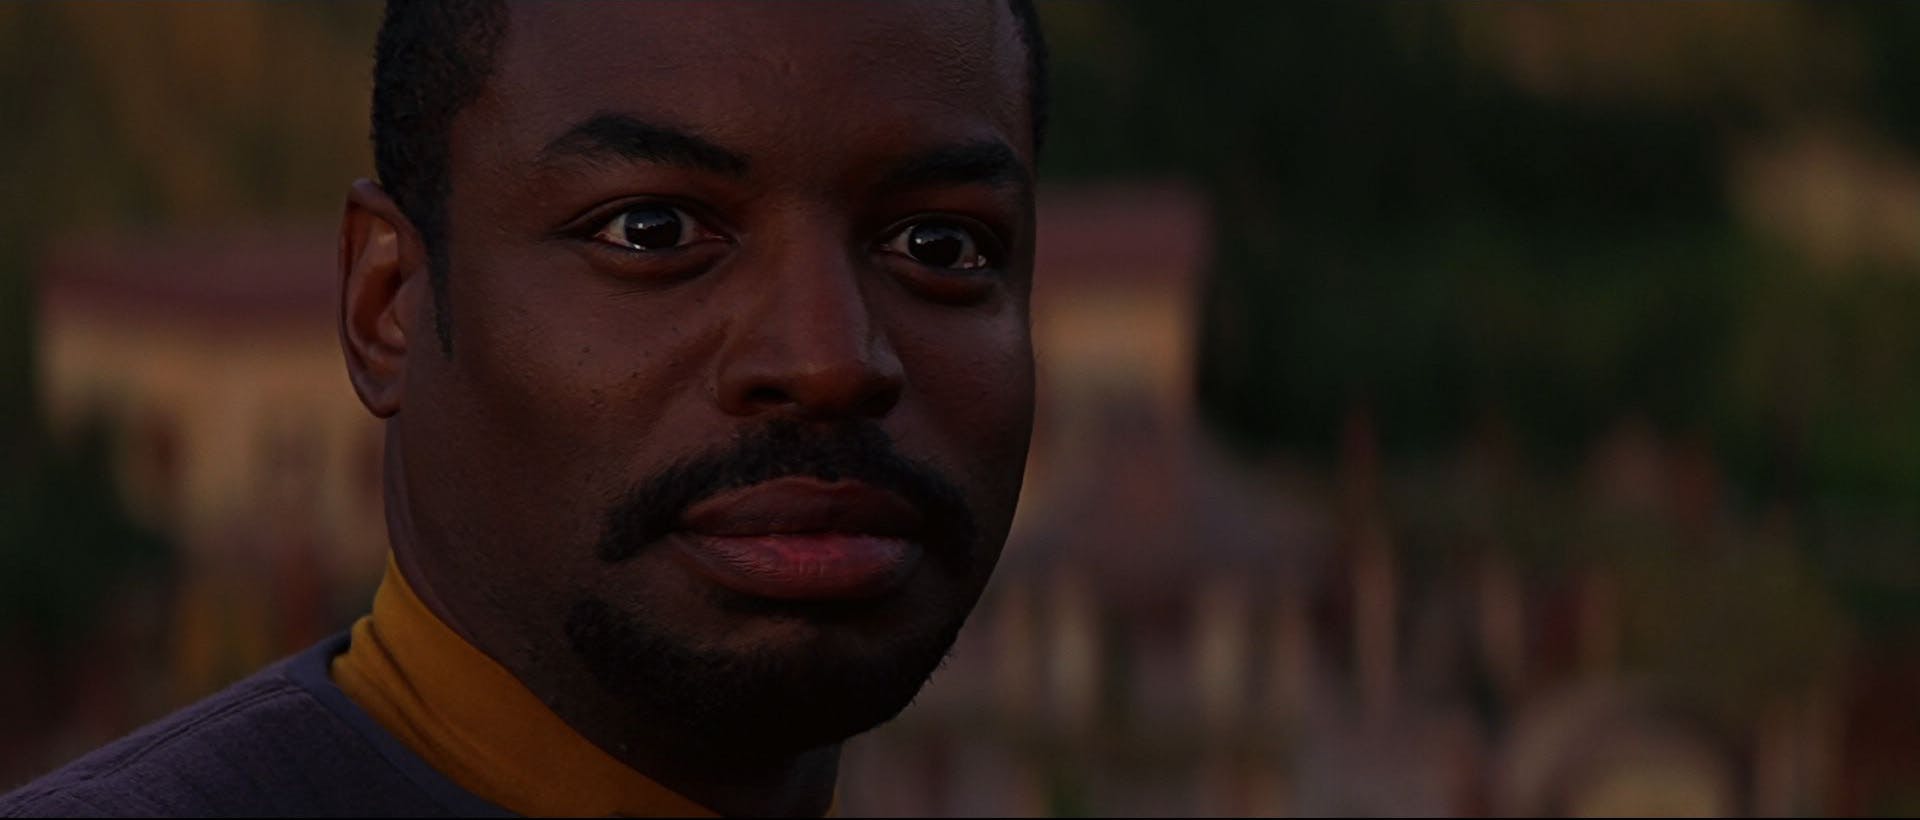 Geordi La Forge realizes a longtime dream of his and experiences a real sunrise with his own eyes upon being healed by the Ba'ku planet's metaphasic radiation in Star Trek: Insurrection